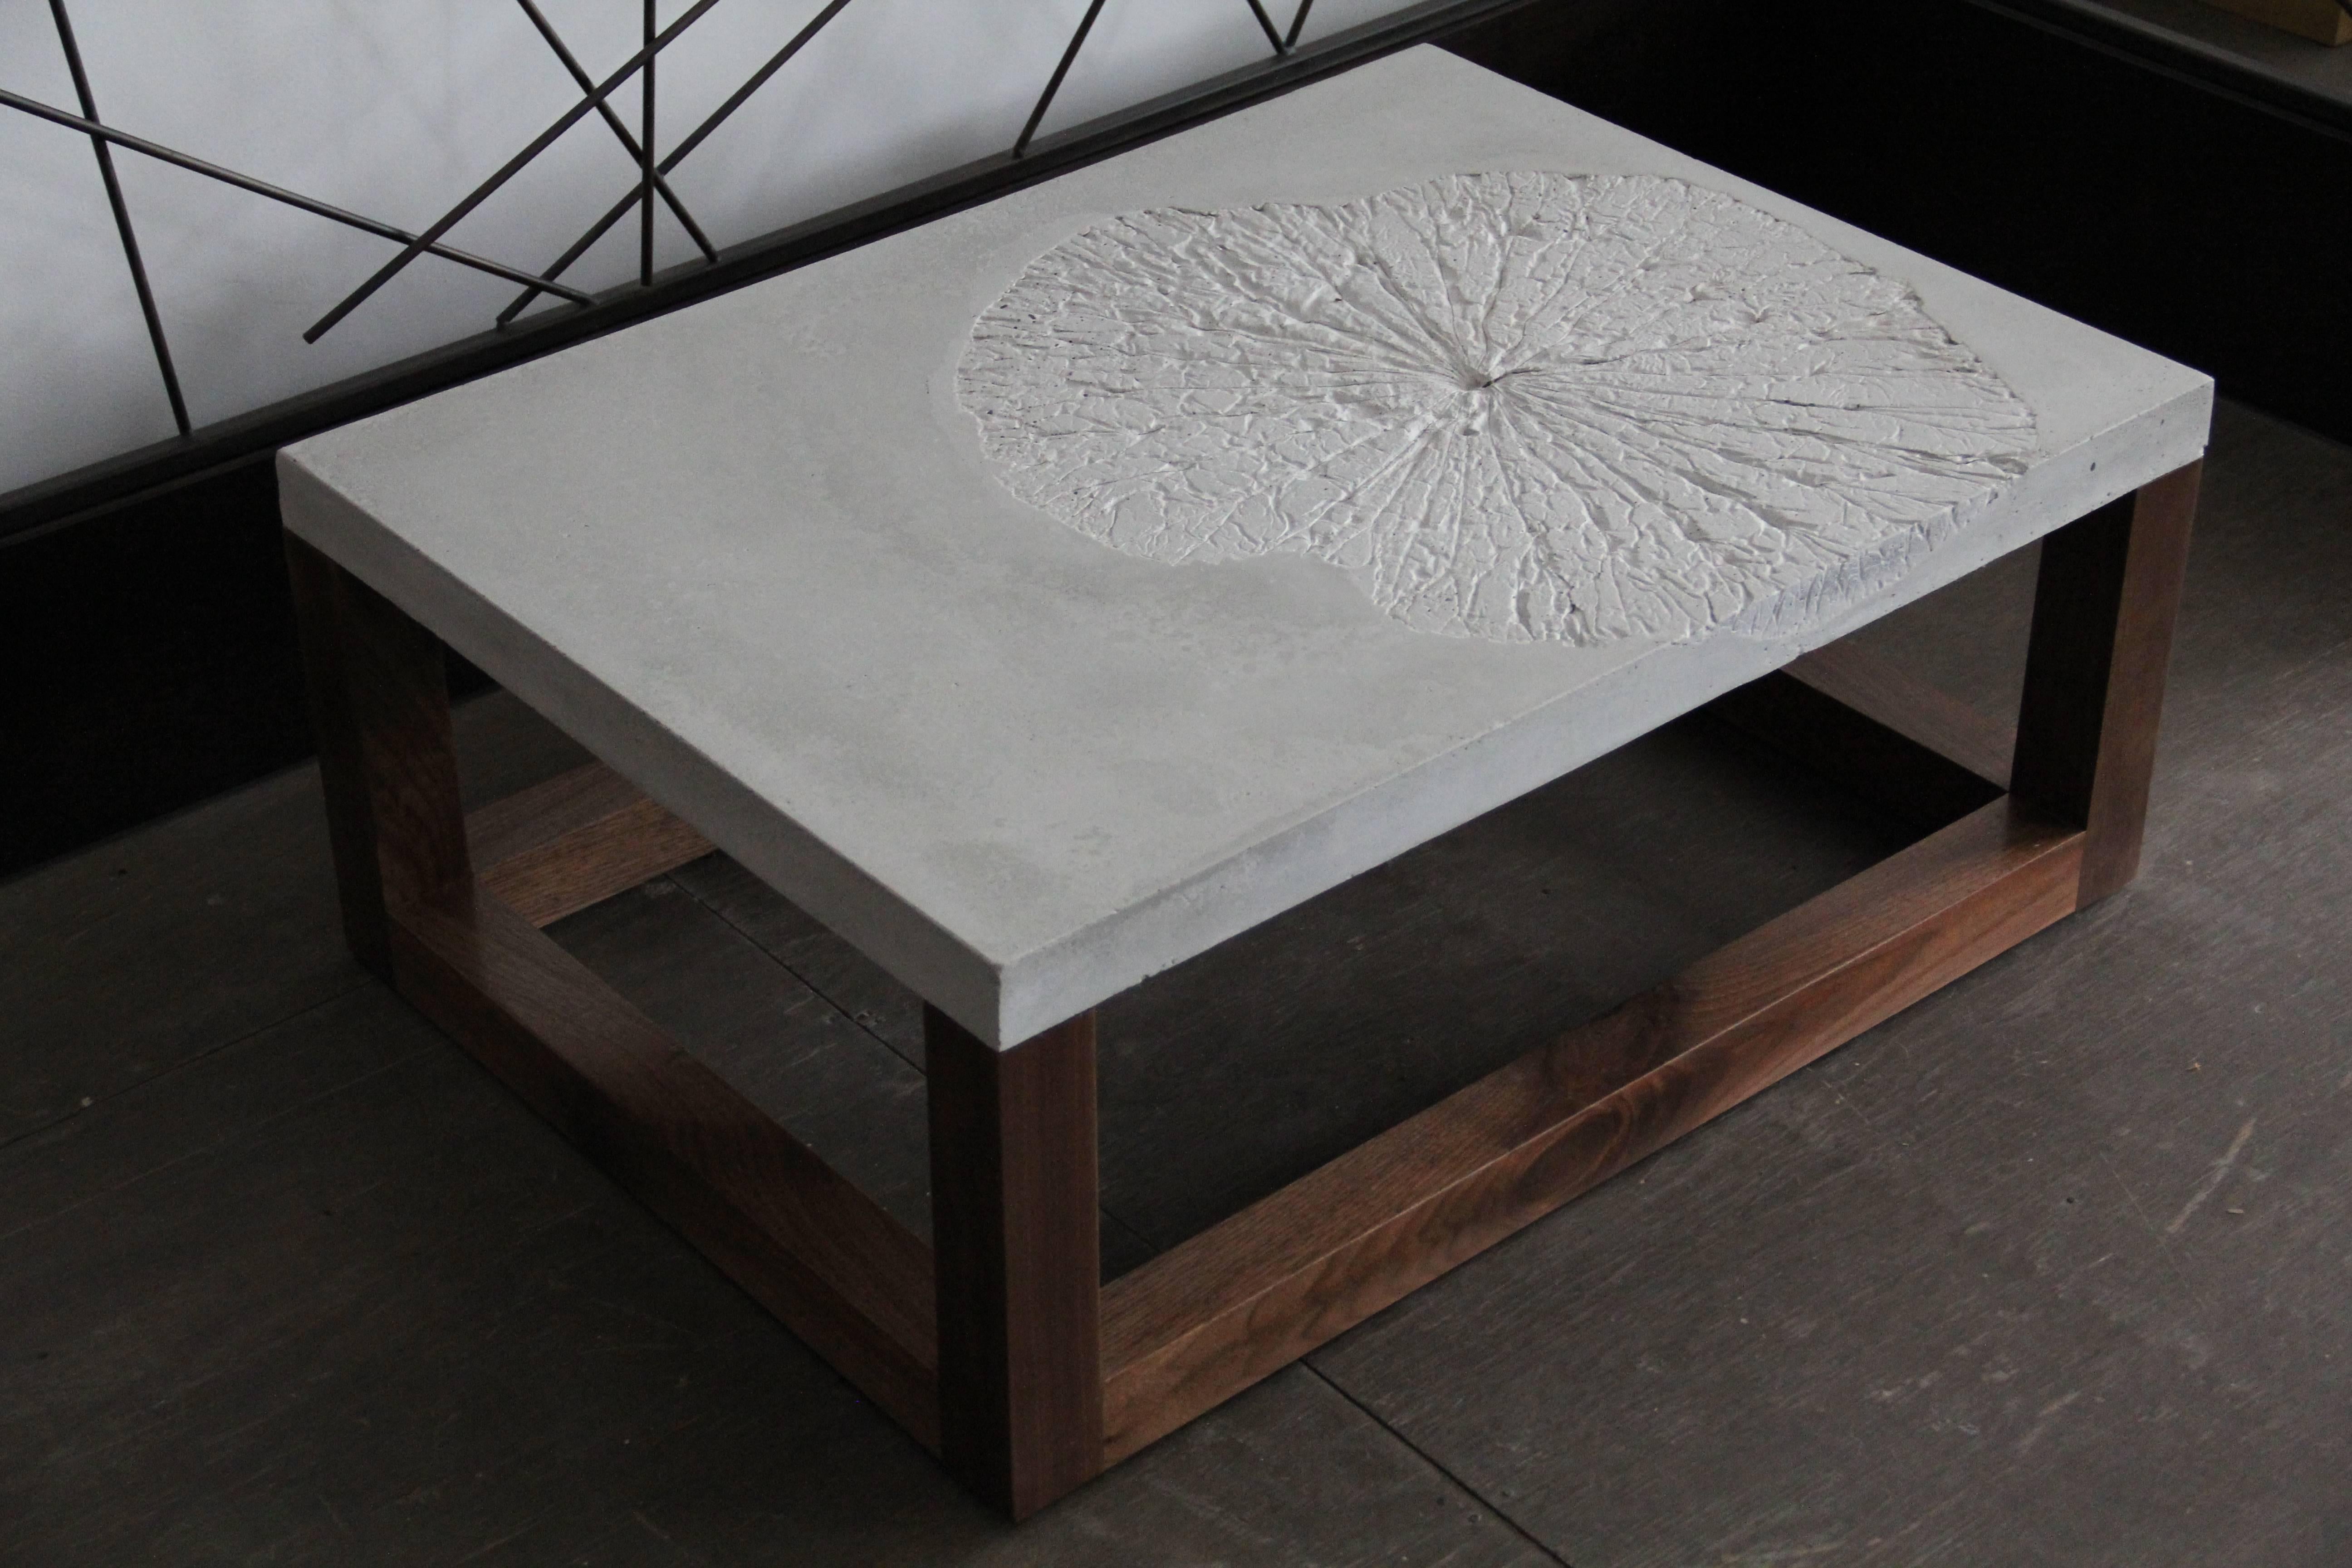 Lotus Leaf or Minimal Modern Concrete Coffee Table In New Condition For Sale In Brooklyn, NY